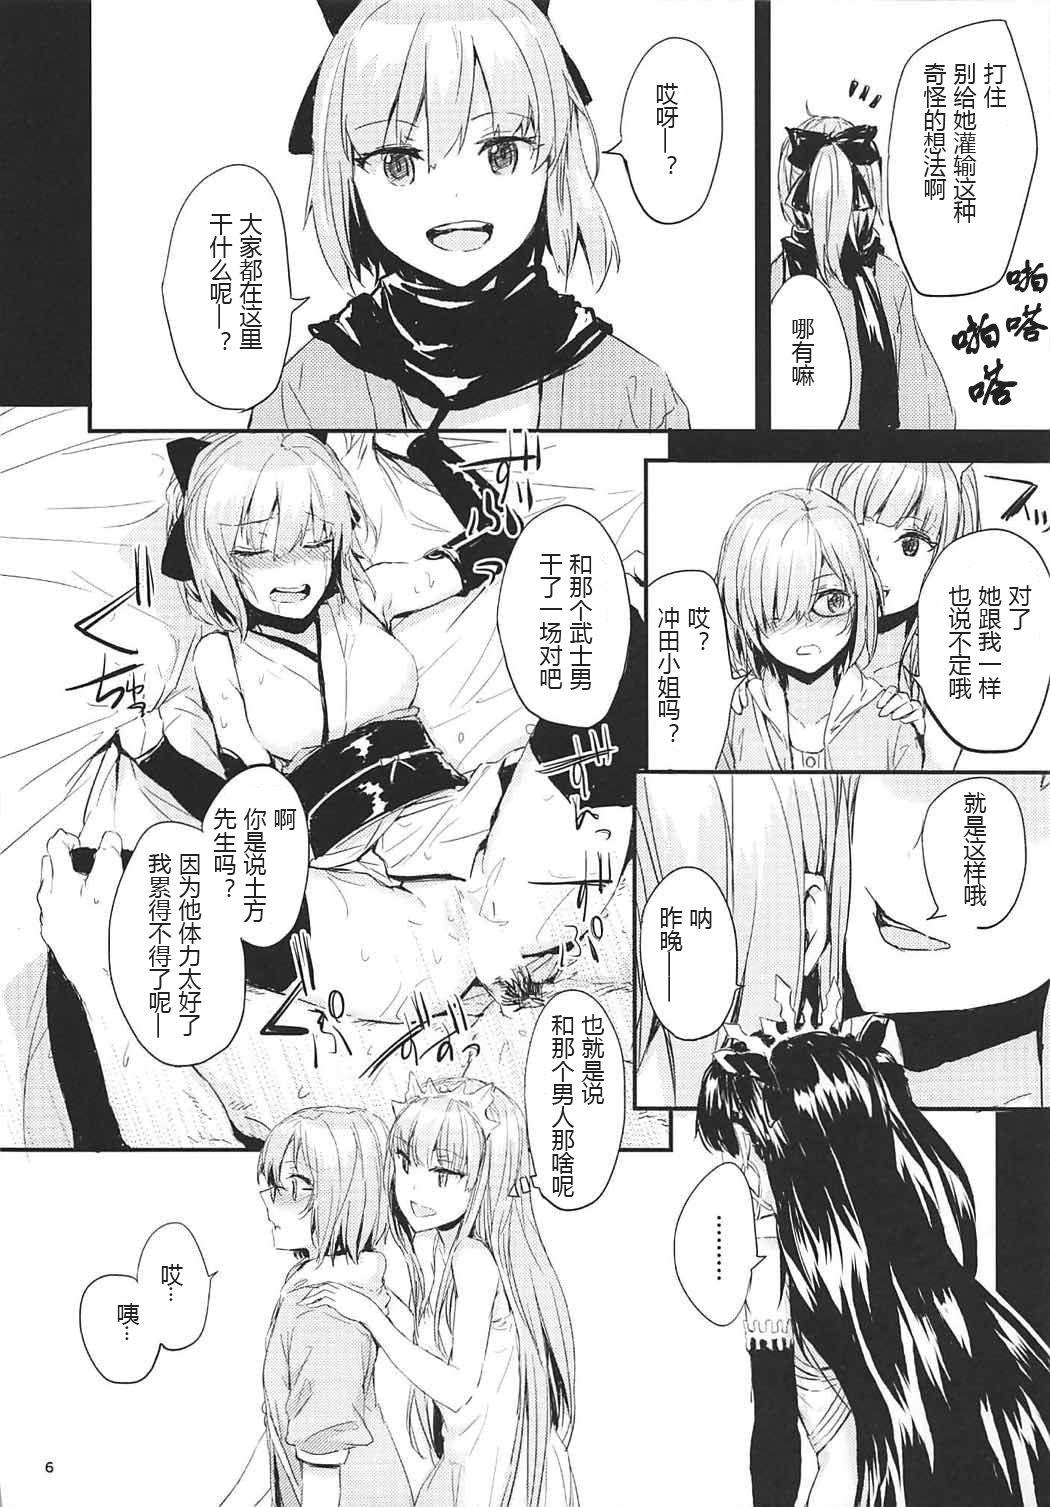 Spooning TOWARDS A COLORFUL WORLD? - Fate grand order Gays - Page 8